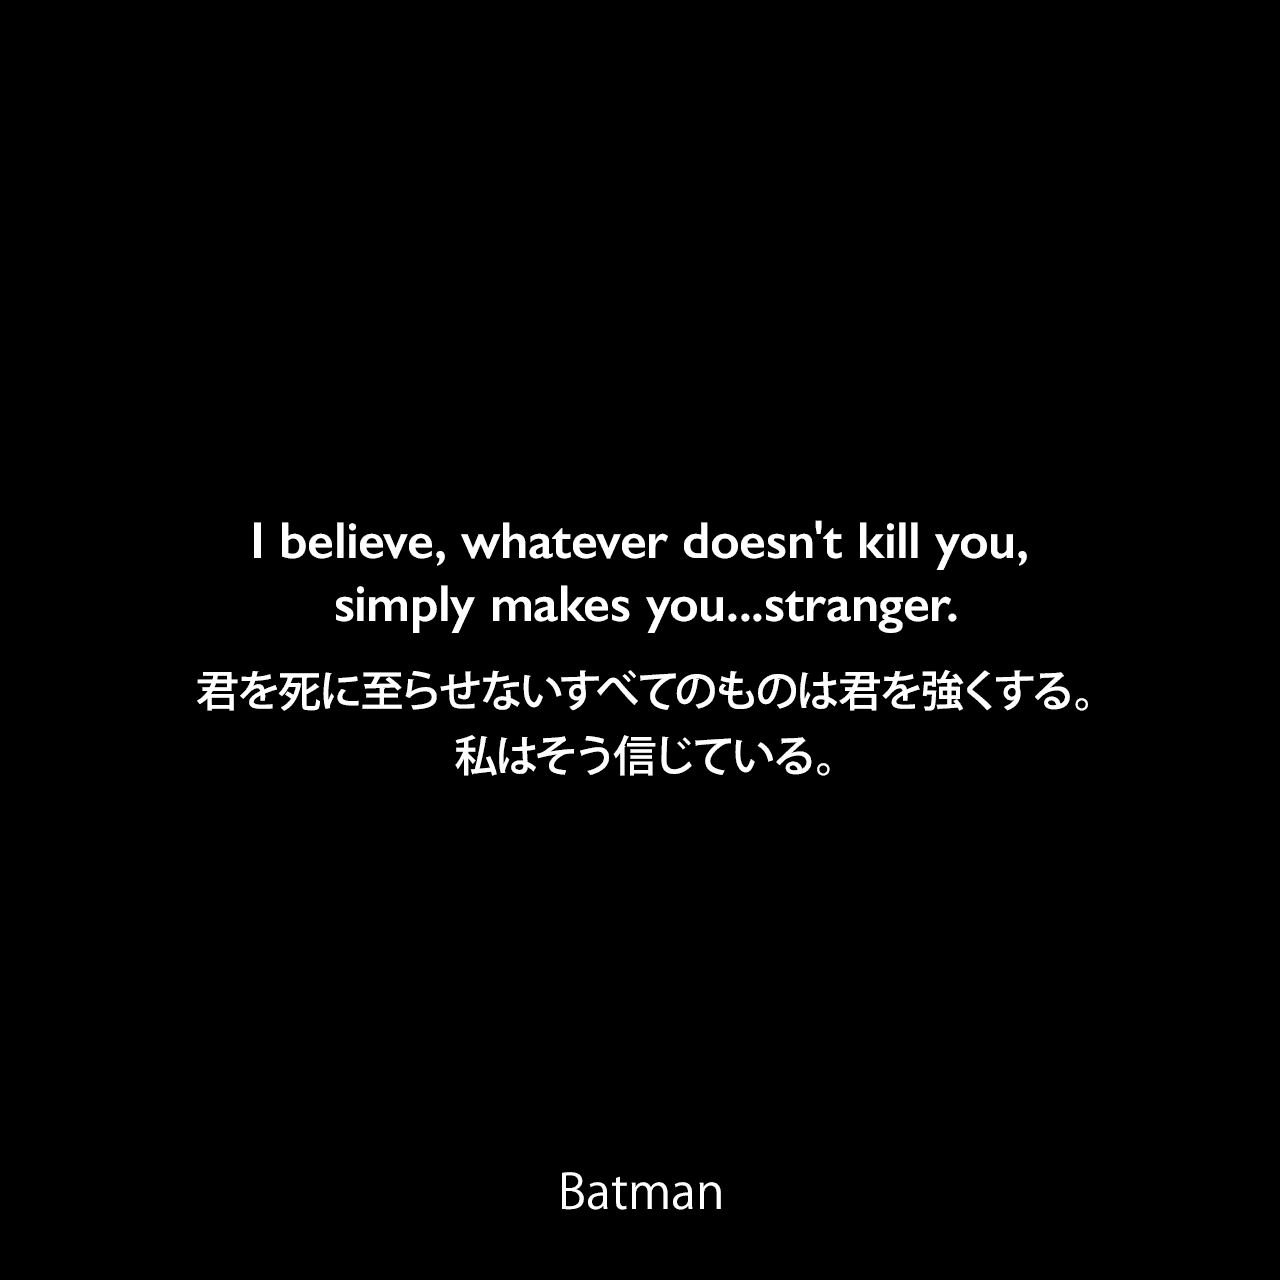 I believe, whatever doesn't kill you, simply makes you...stranger.君を死に至らせないすべてのものは君を強くする。私はそう信じている。- Jorker 